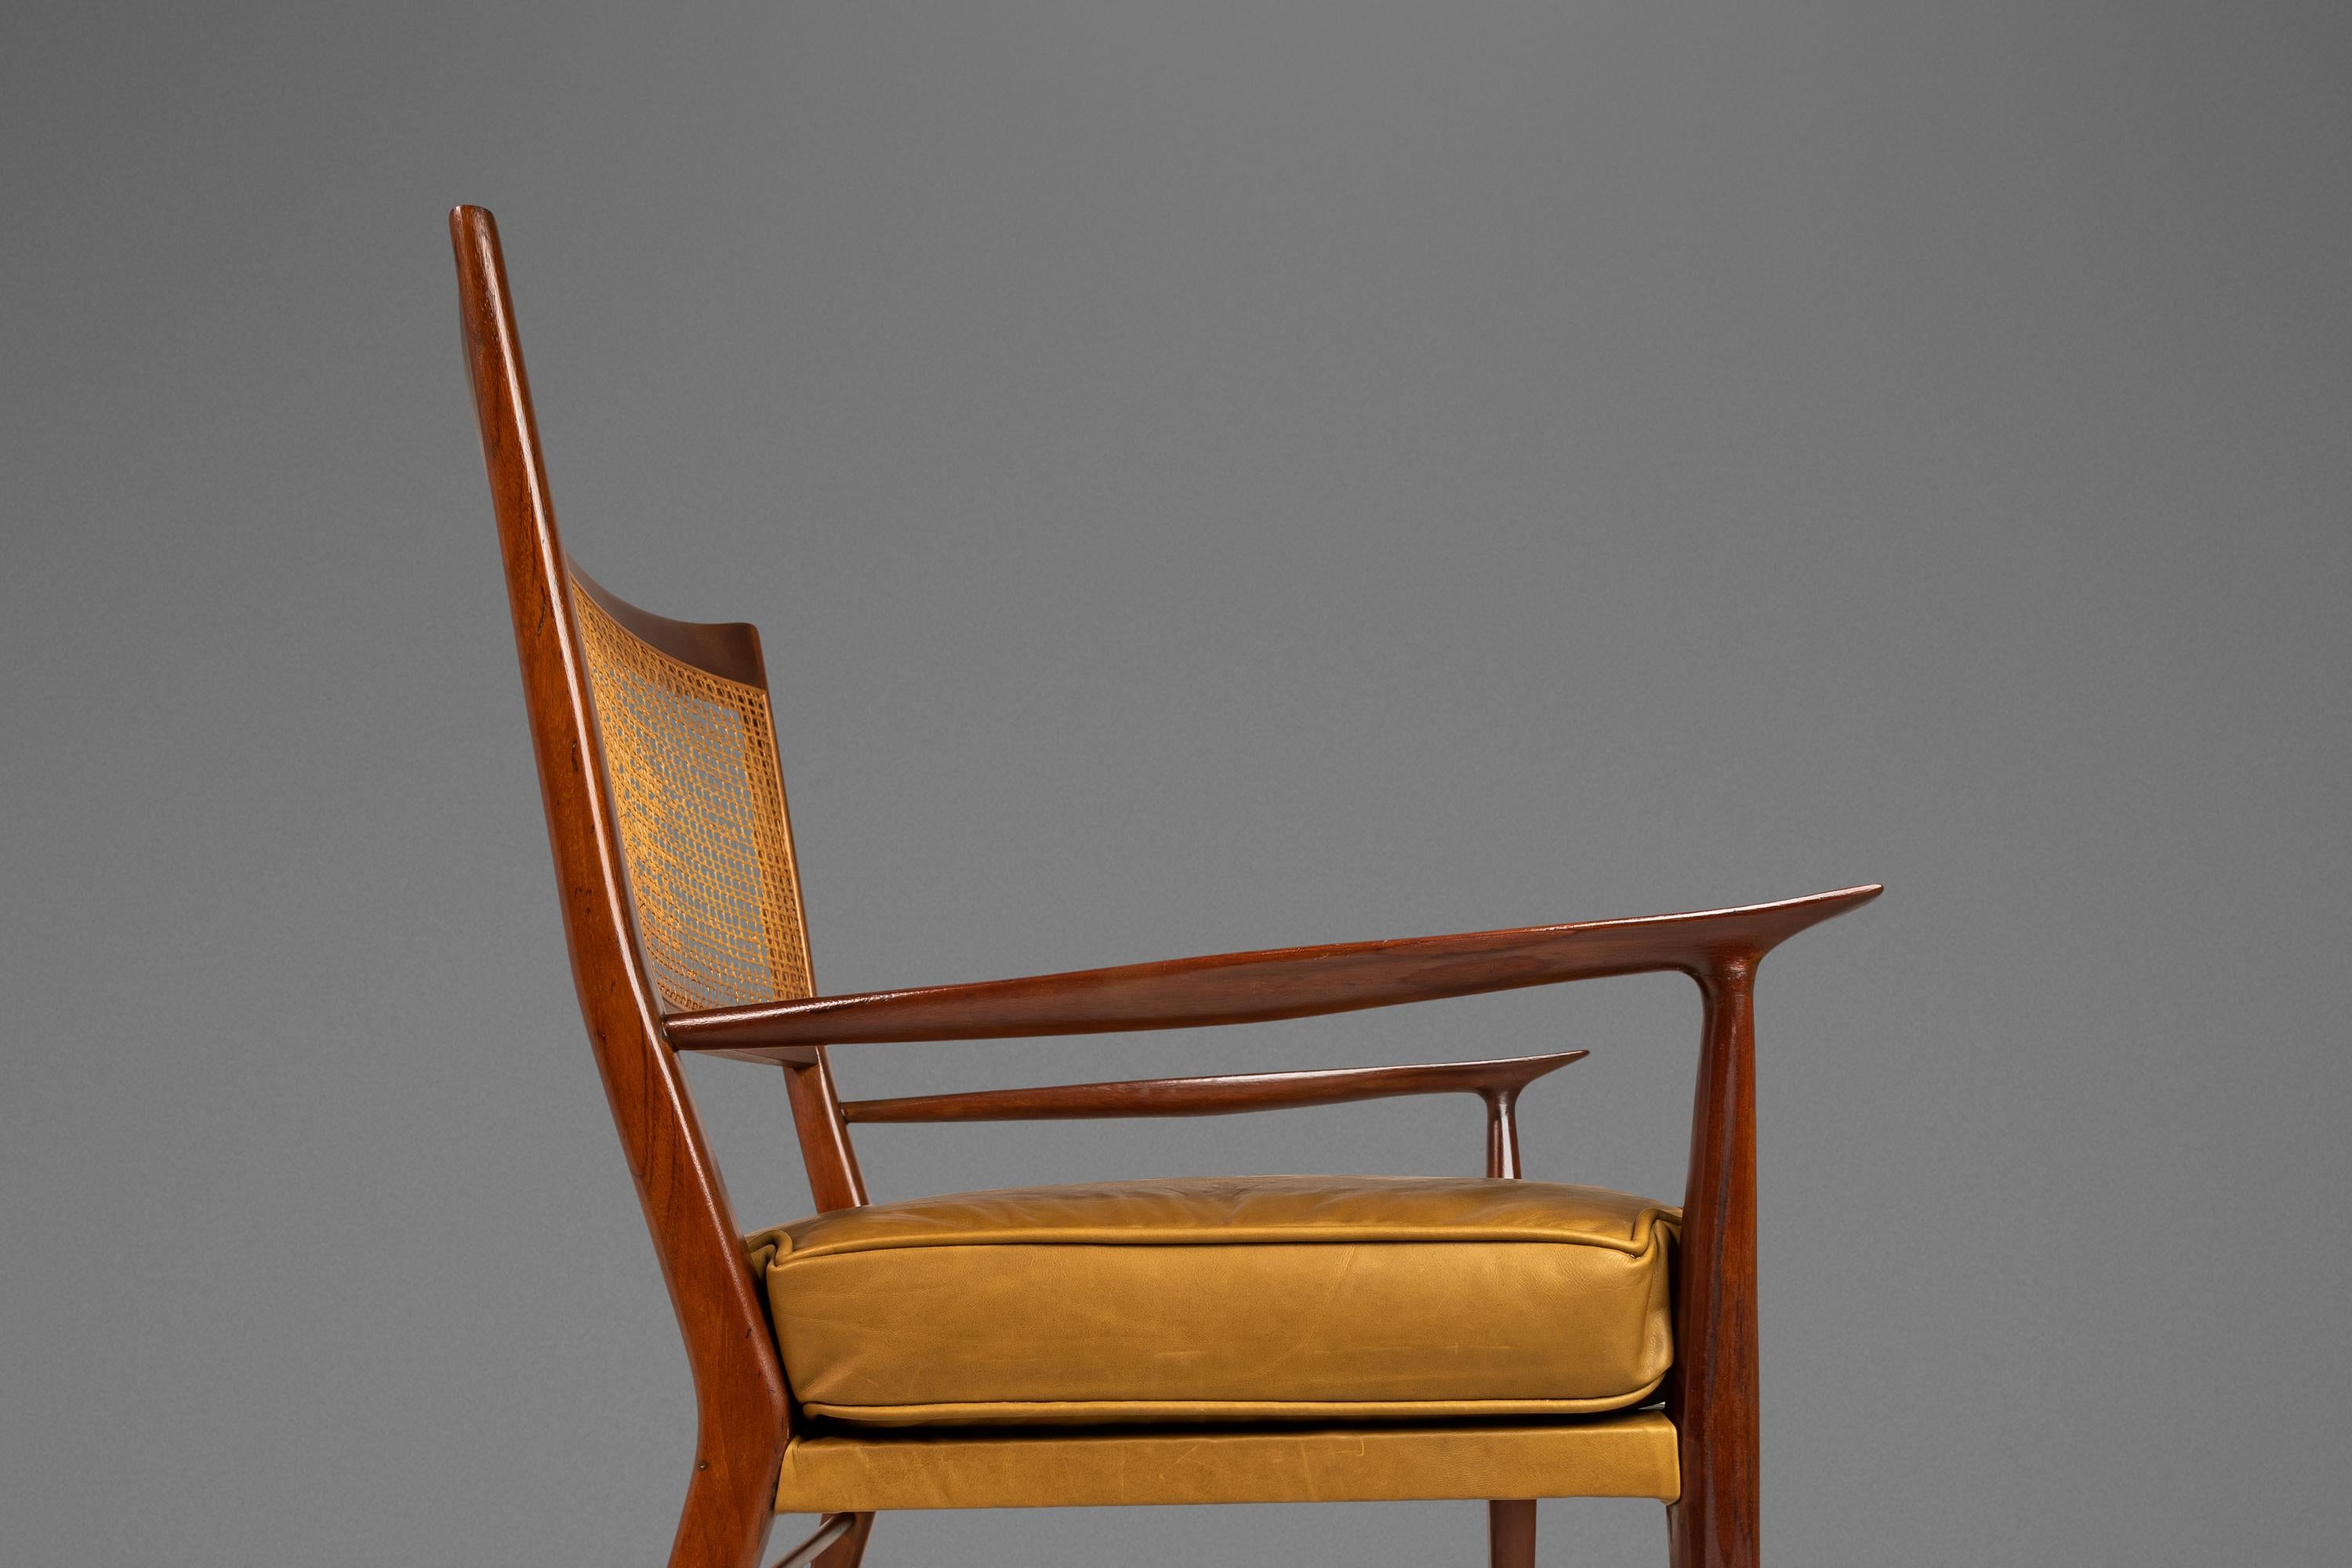 MCM Model 7001 Chair in Walnut by Paul McCobb for Directional, USA, c. 1950s For Sale 7